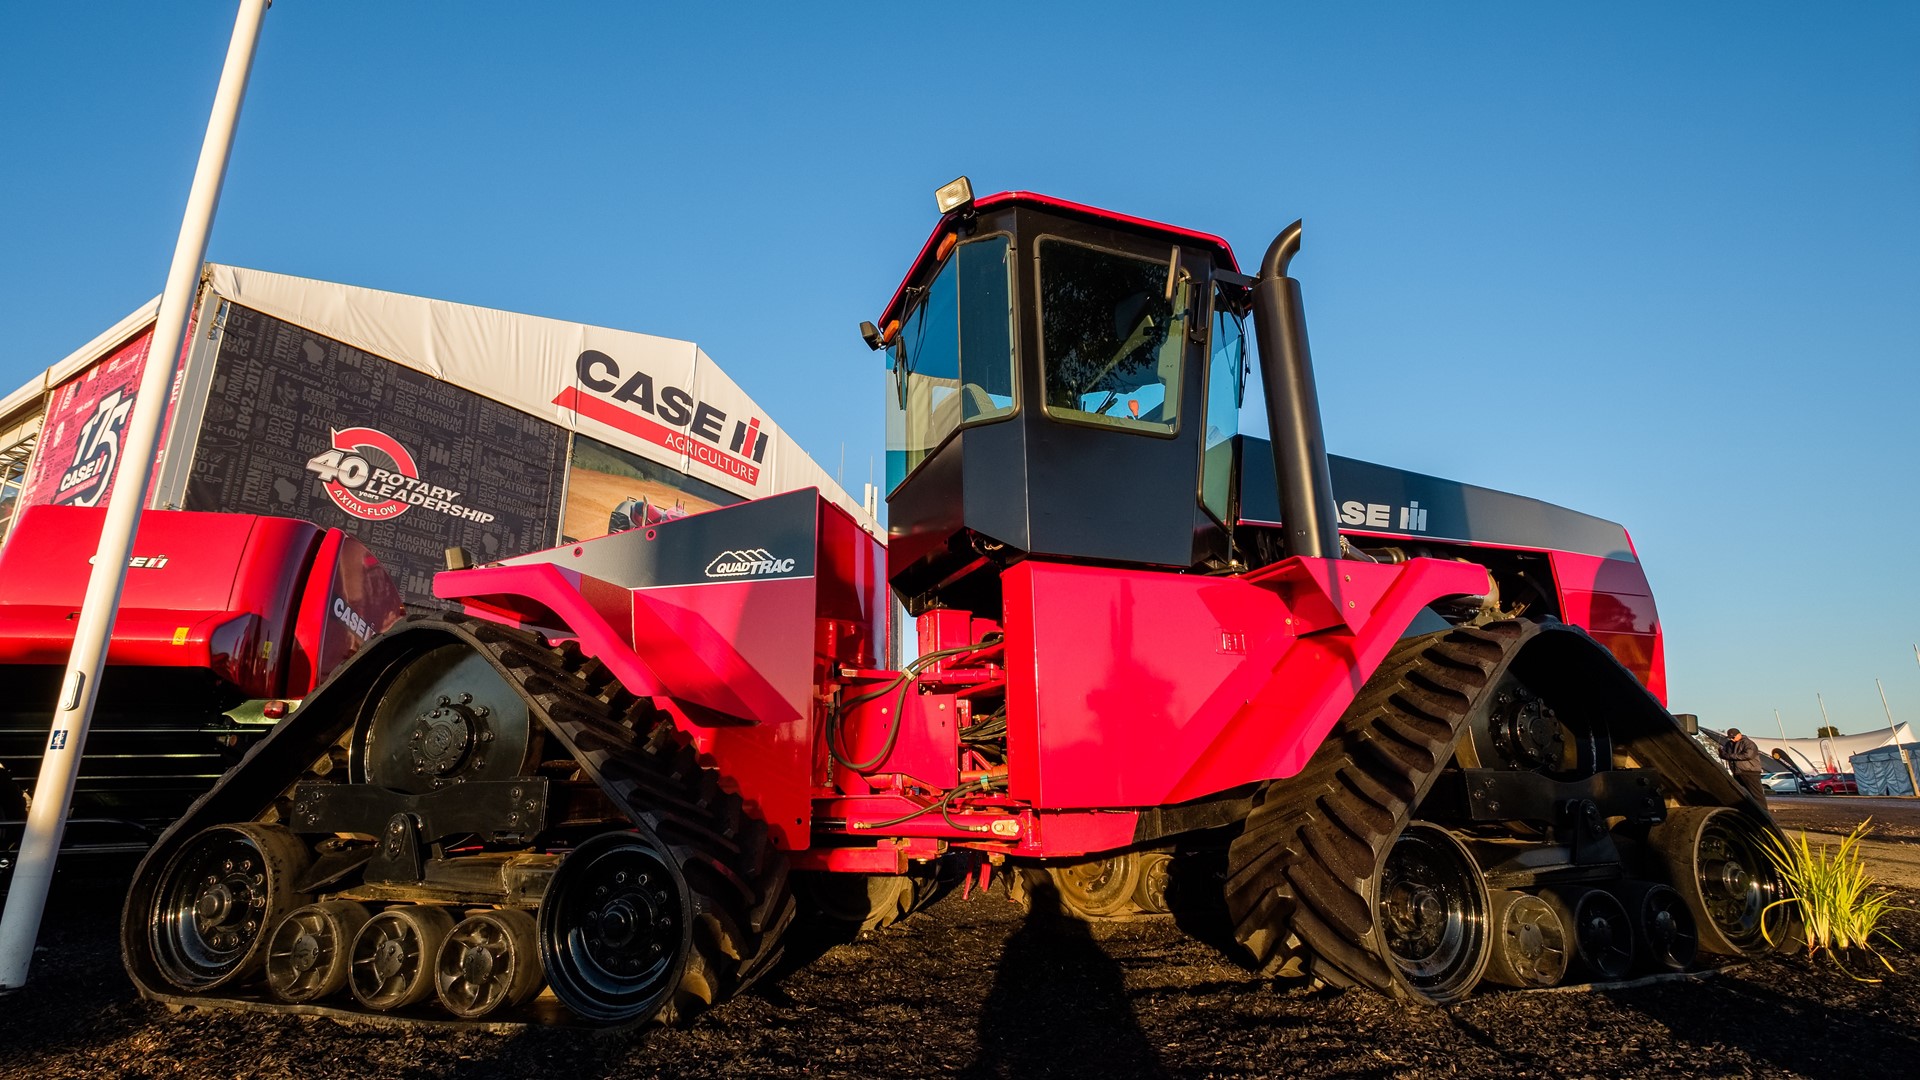 The fully-restored Case IH Steiger Quadtrac on show